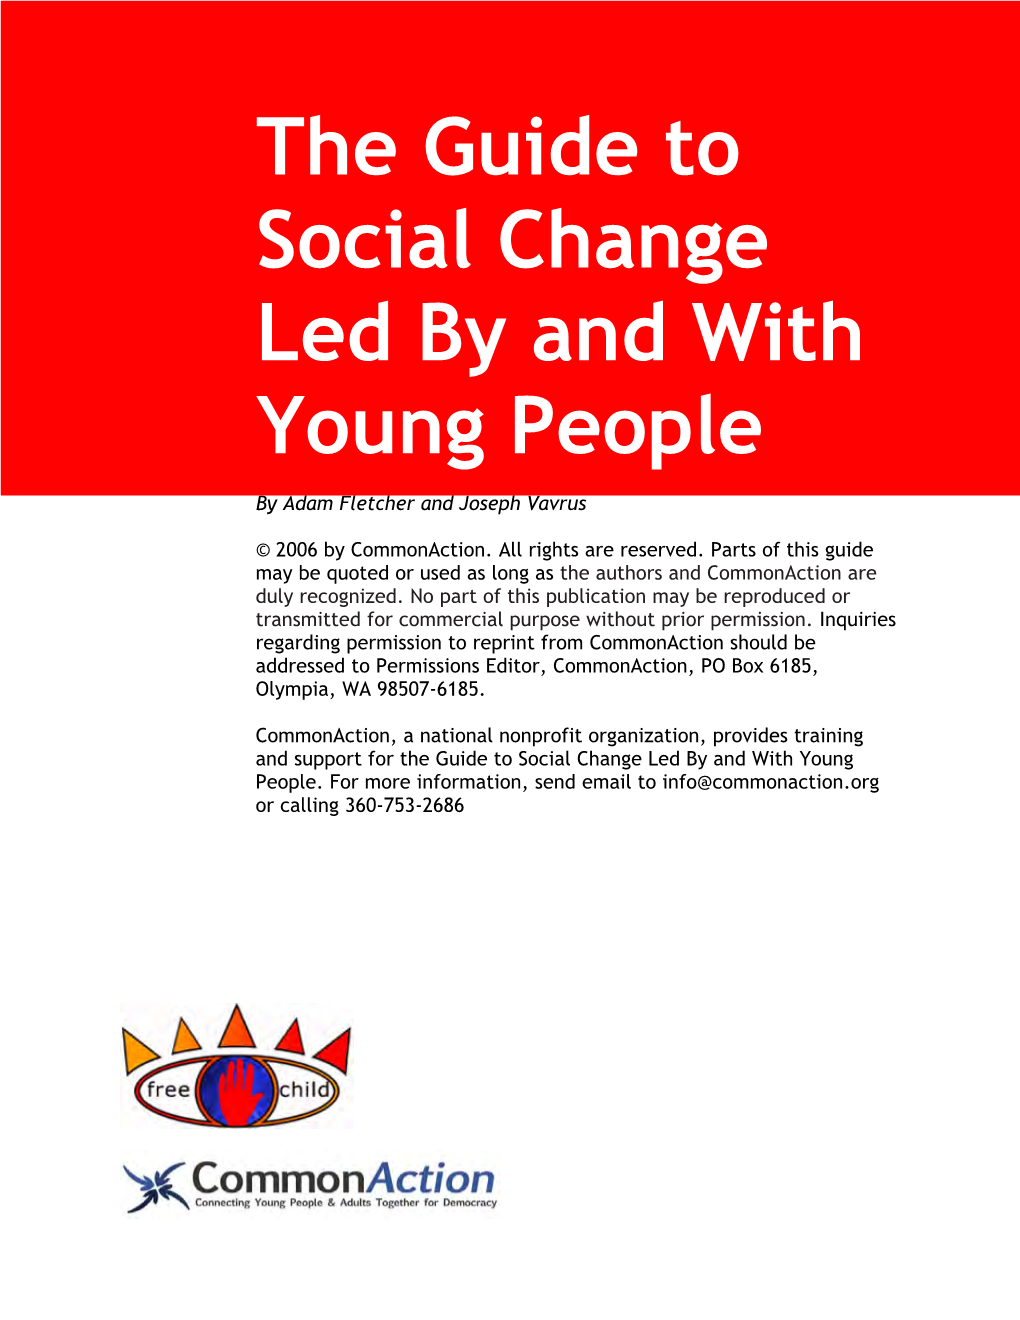 Guide to Social Change Led by and with Young People